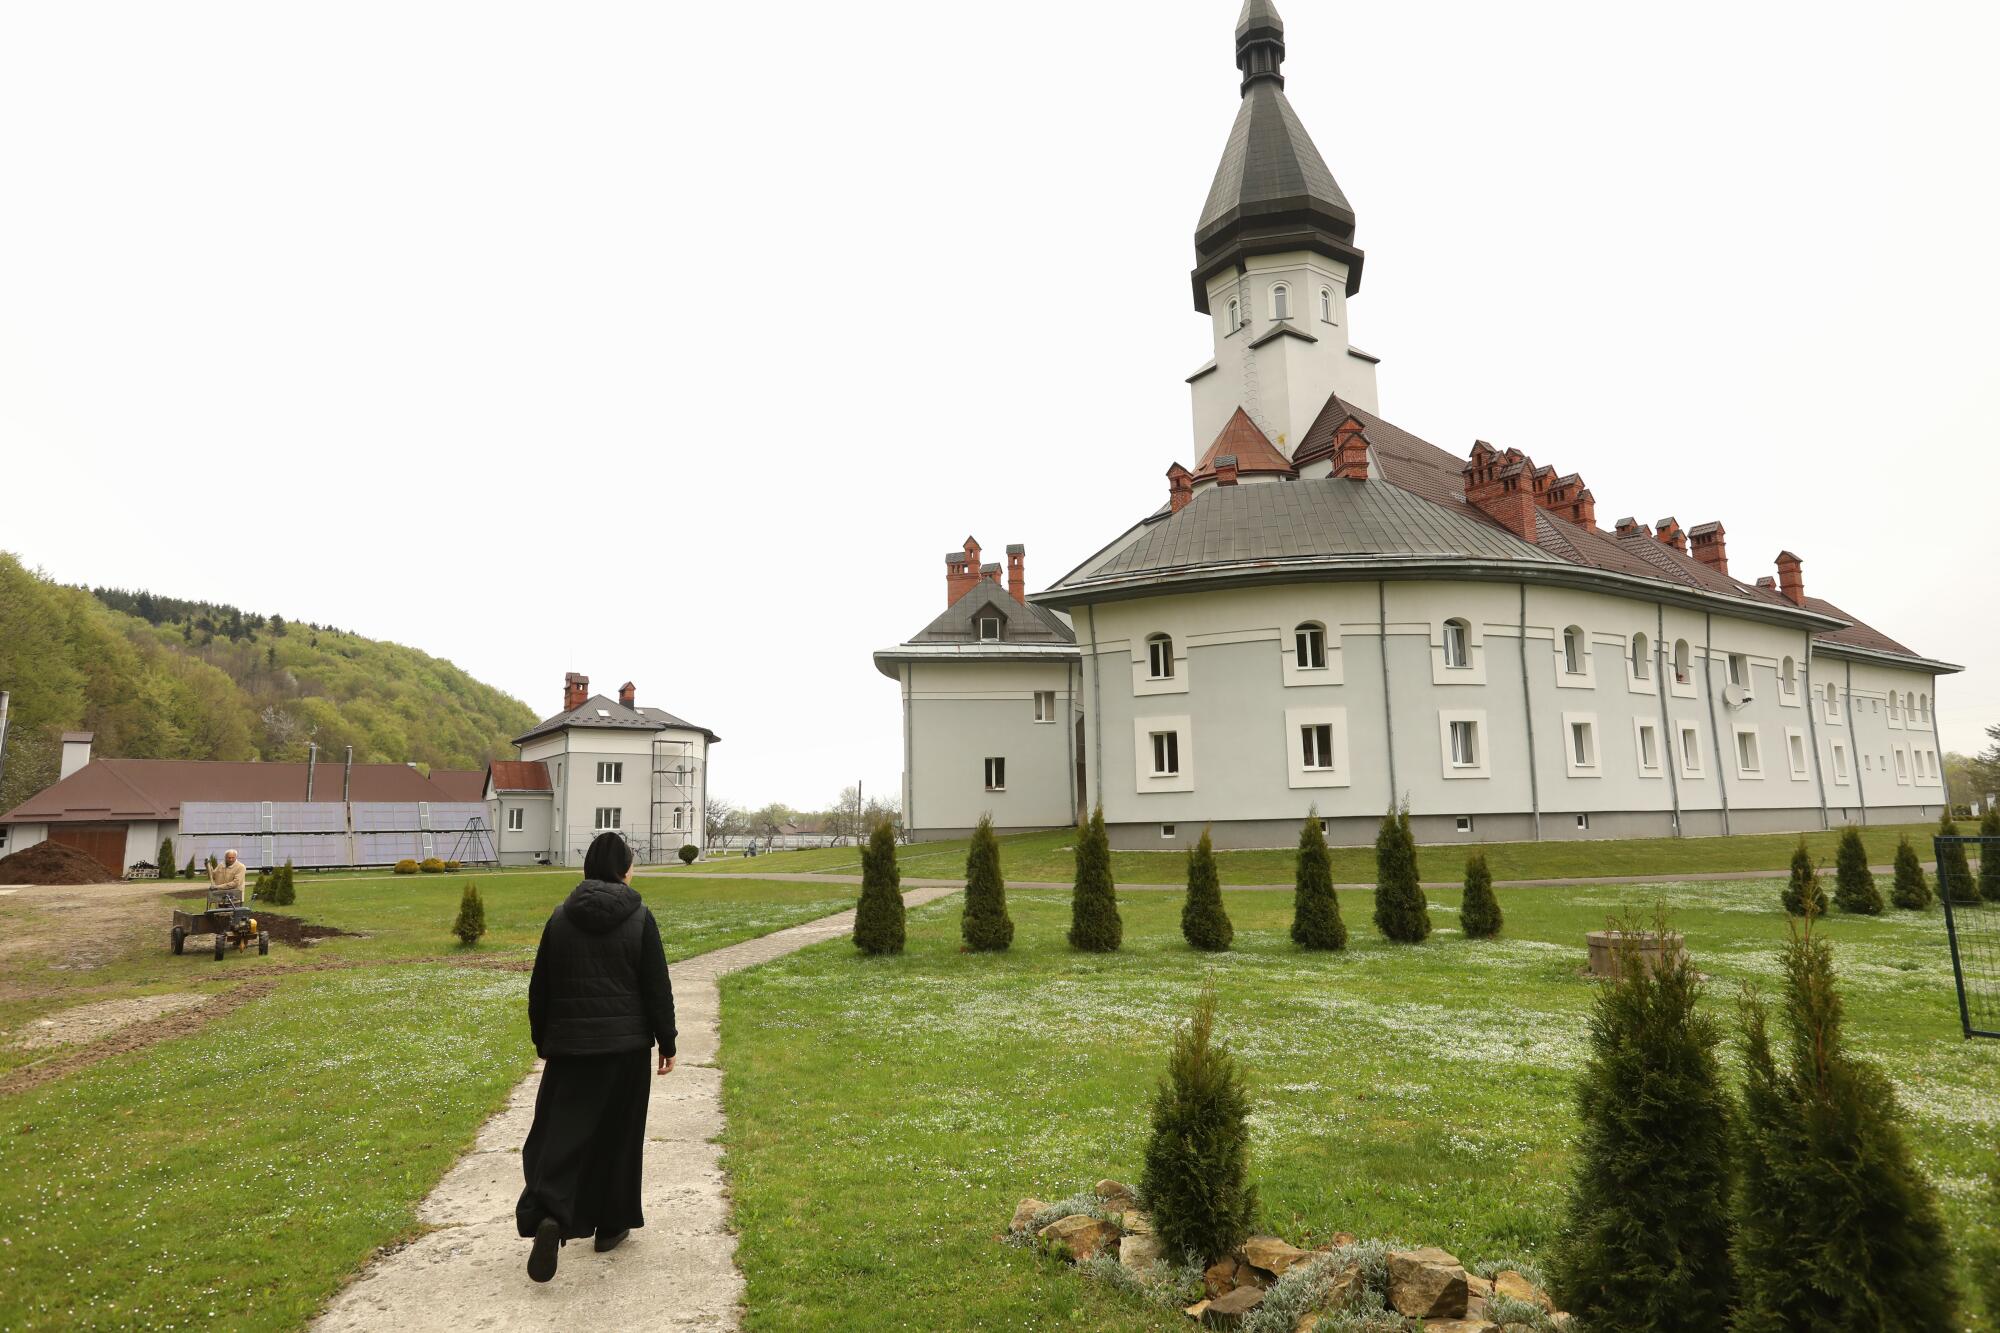 Sister Bernadette is one of the sisters at the Sisters of the Holy Family monastery in Hoshiv, Ukraine